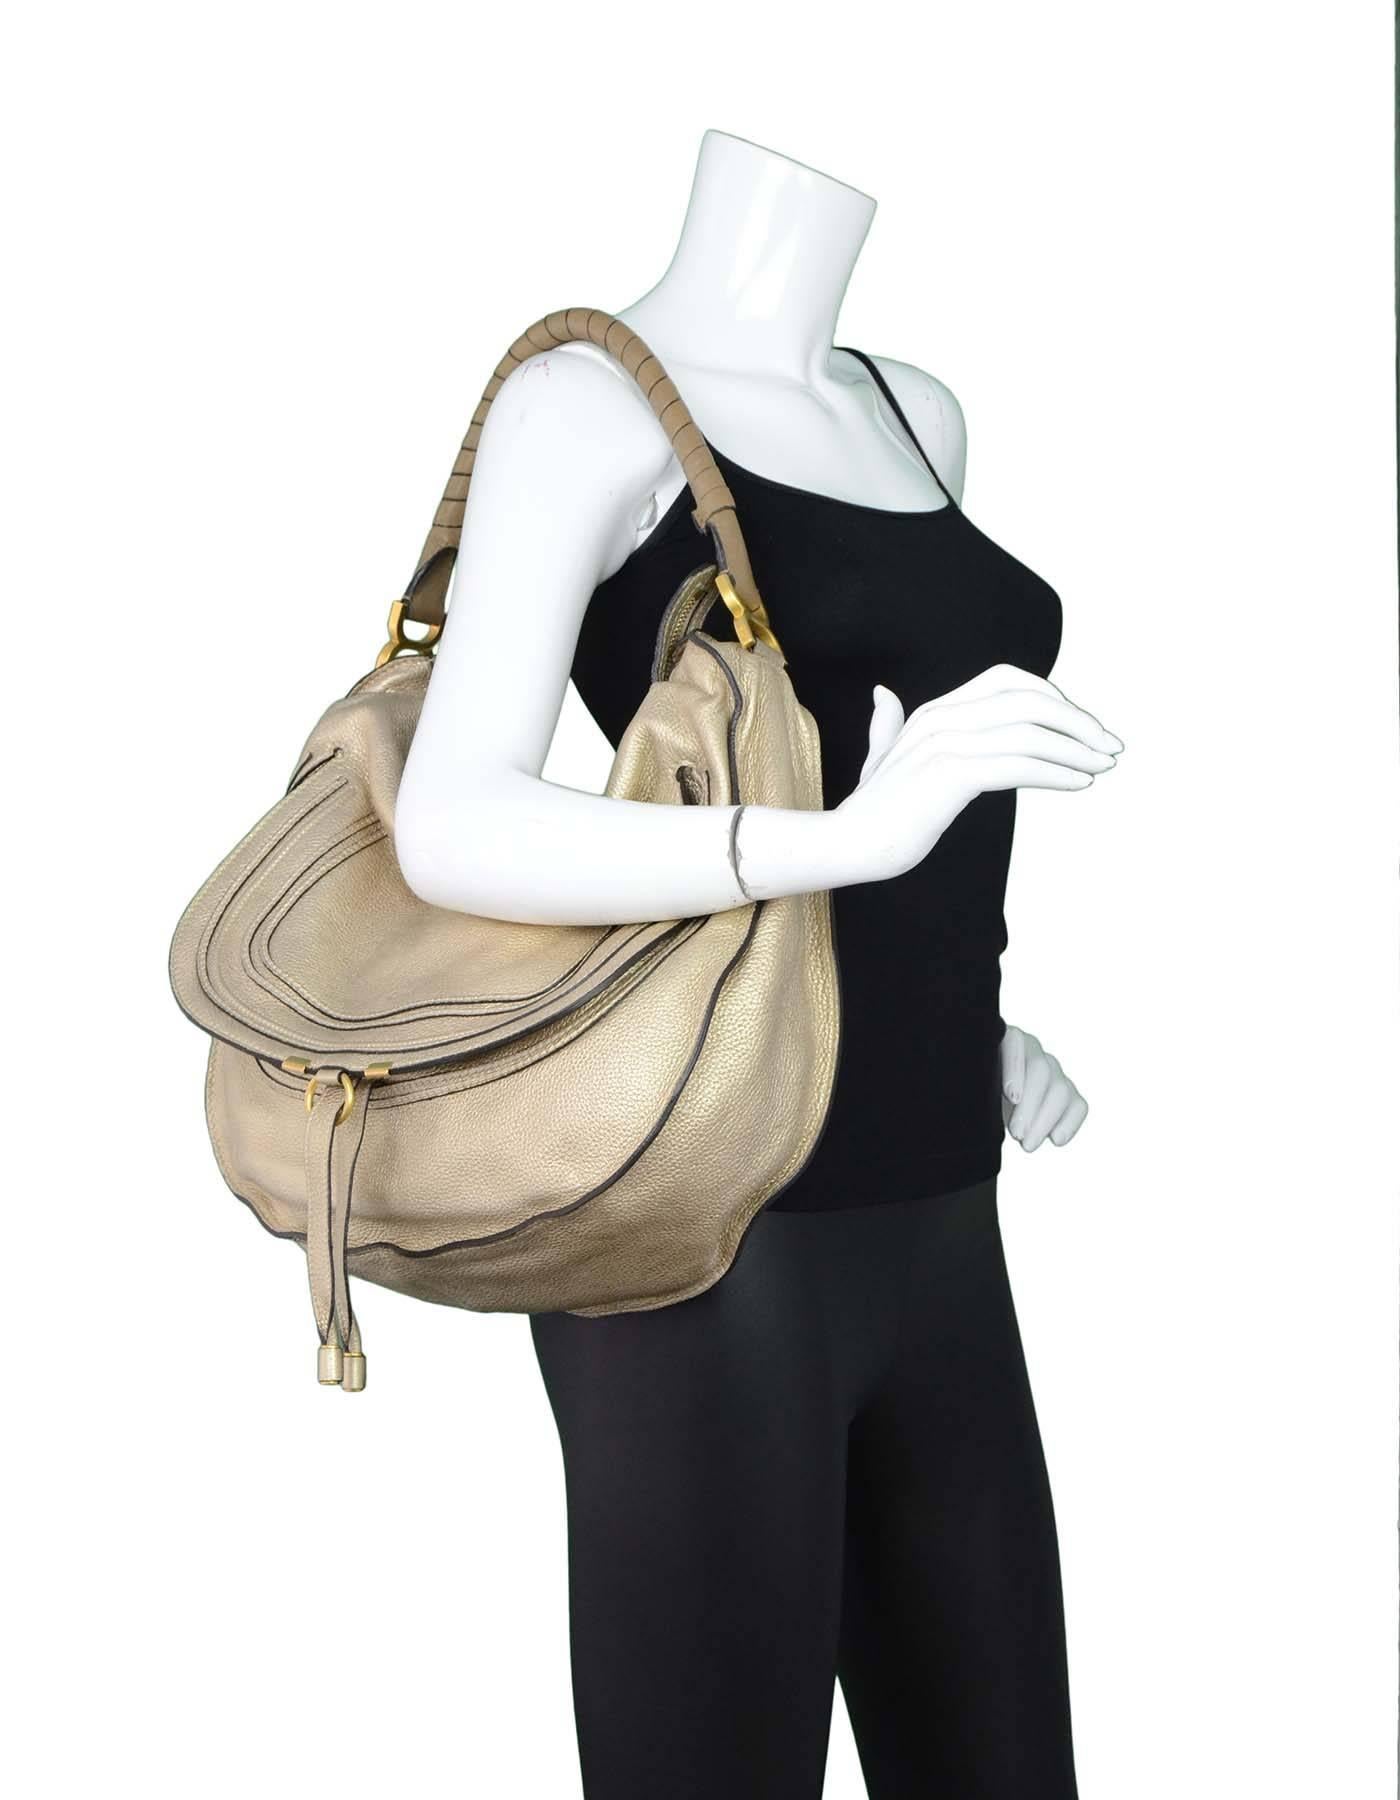 Chloe Gold Leather Large Marcie Hobo with GHW

Features woven handle detail

Made In: Italy
Color: Gold
Hardware: Bushed goldtone
Materials: Leather
Lining: Black textile
Closure/opening: Zip top closure
Exterior Pockets: One pocket at